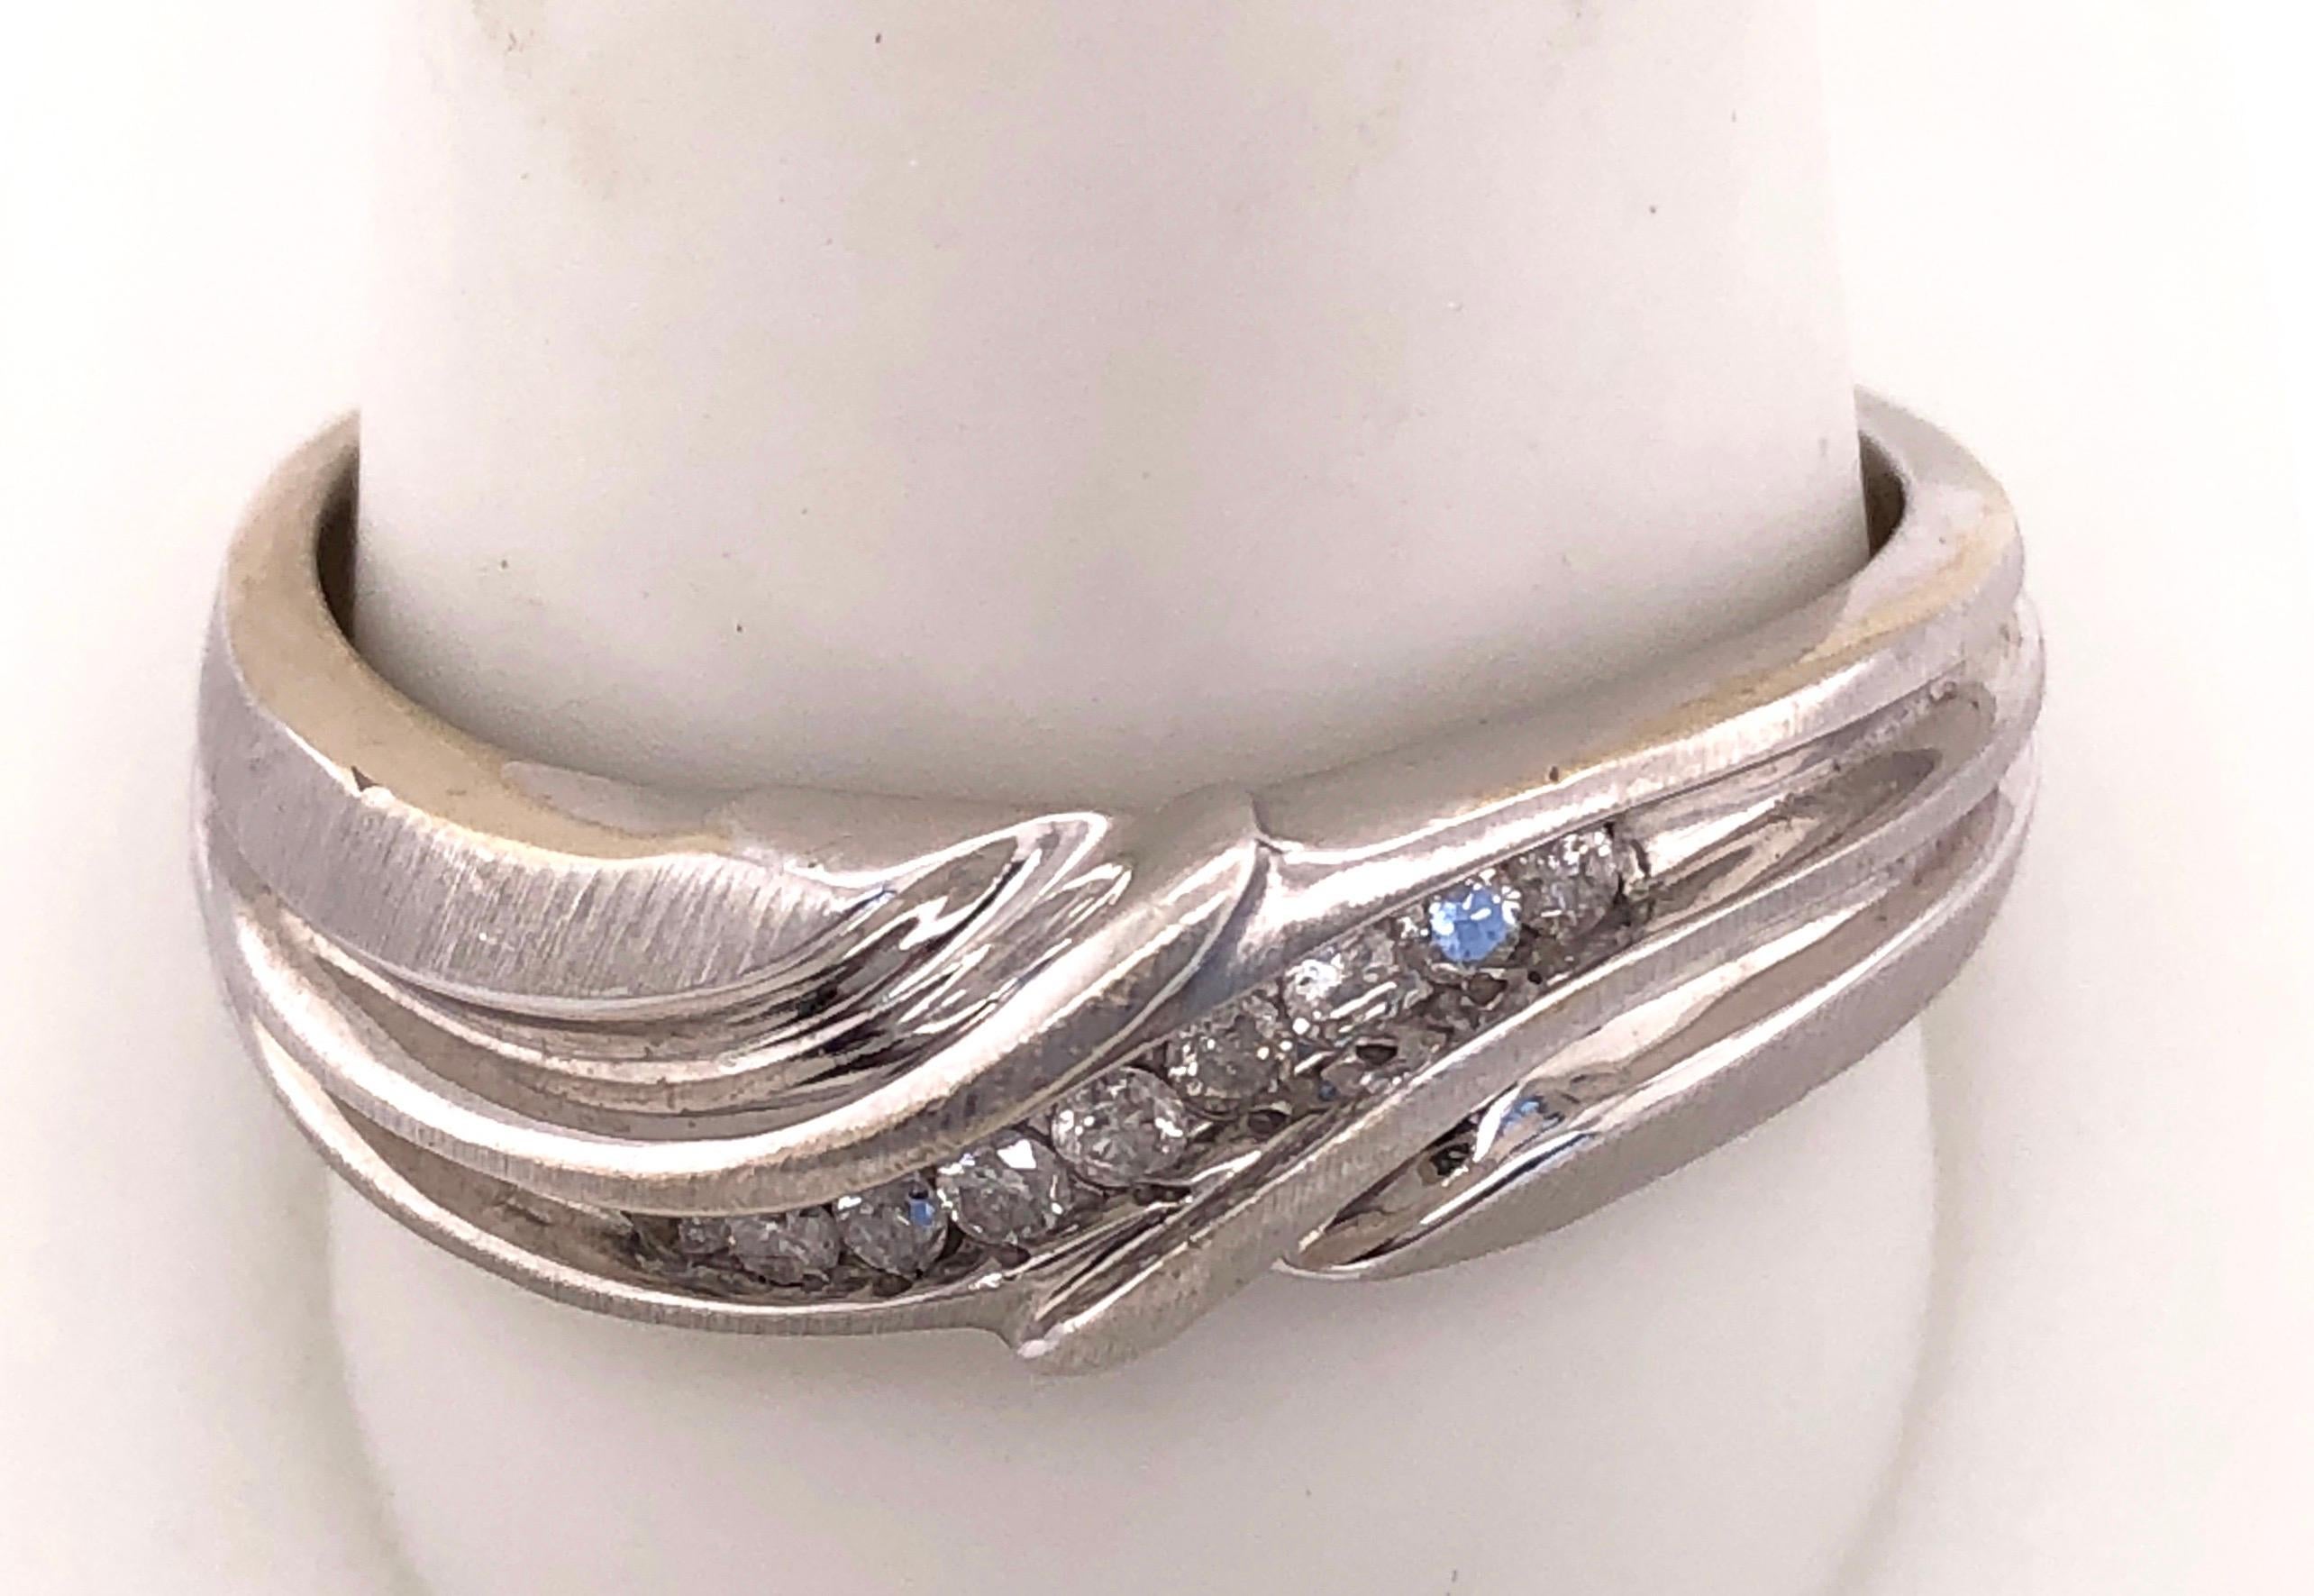 14Kt White Gold Band Ring with Diamond 0.20 Total Diamond Weight
Size 11.5 with 6 grams Total weight